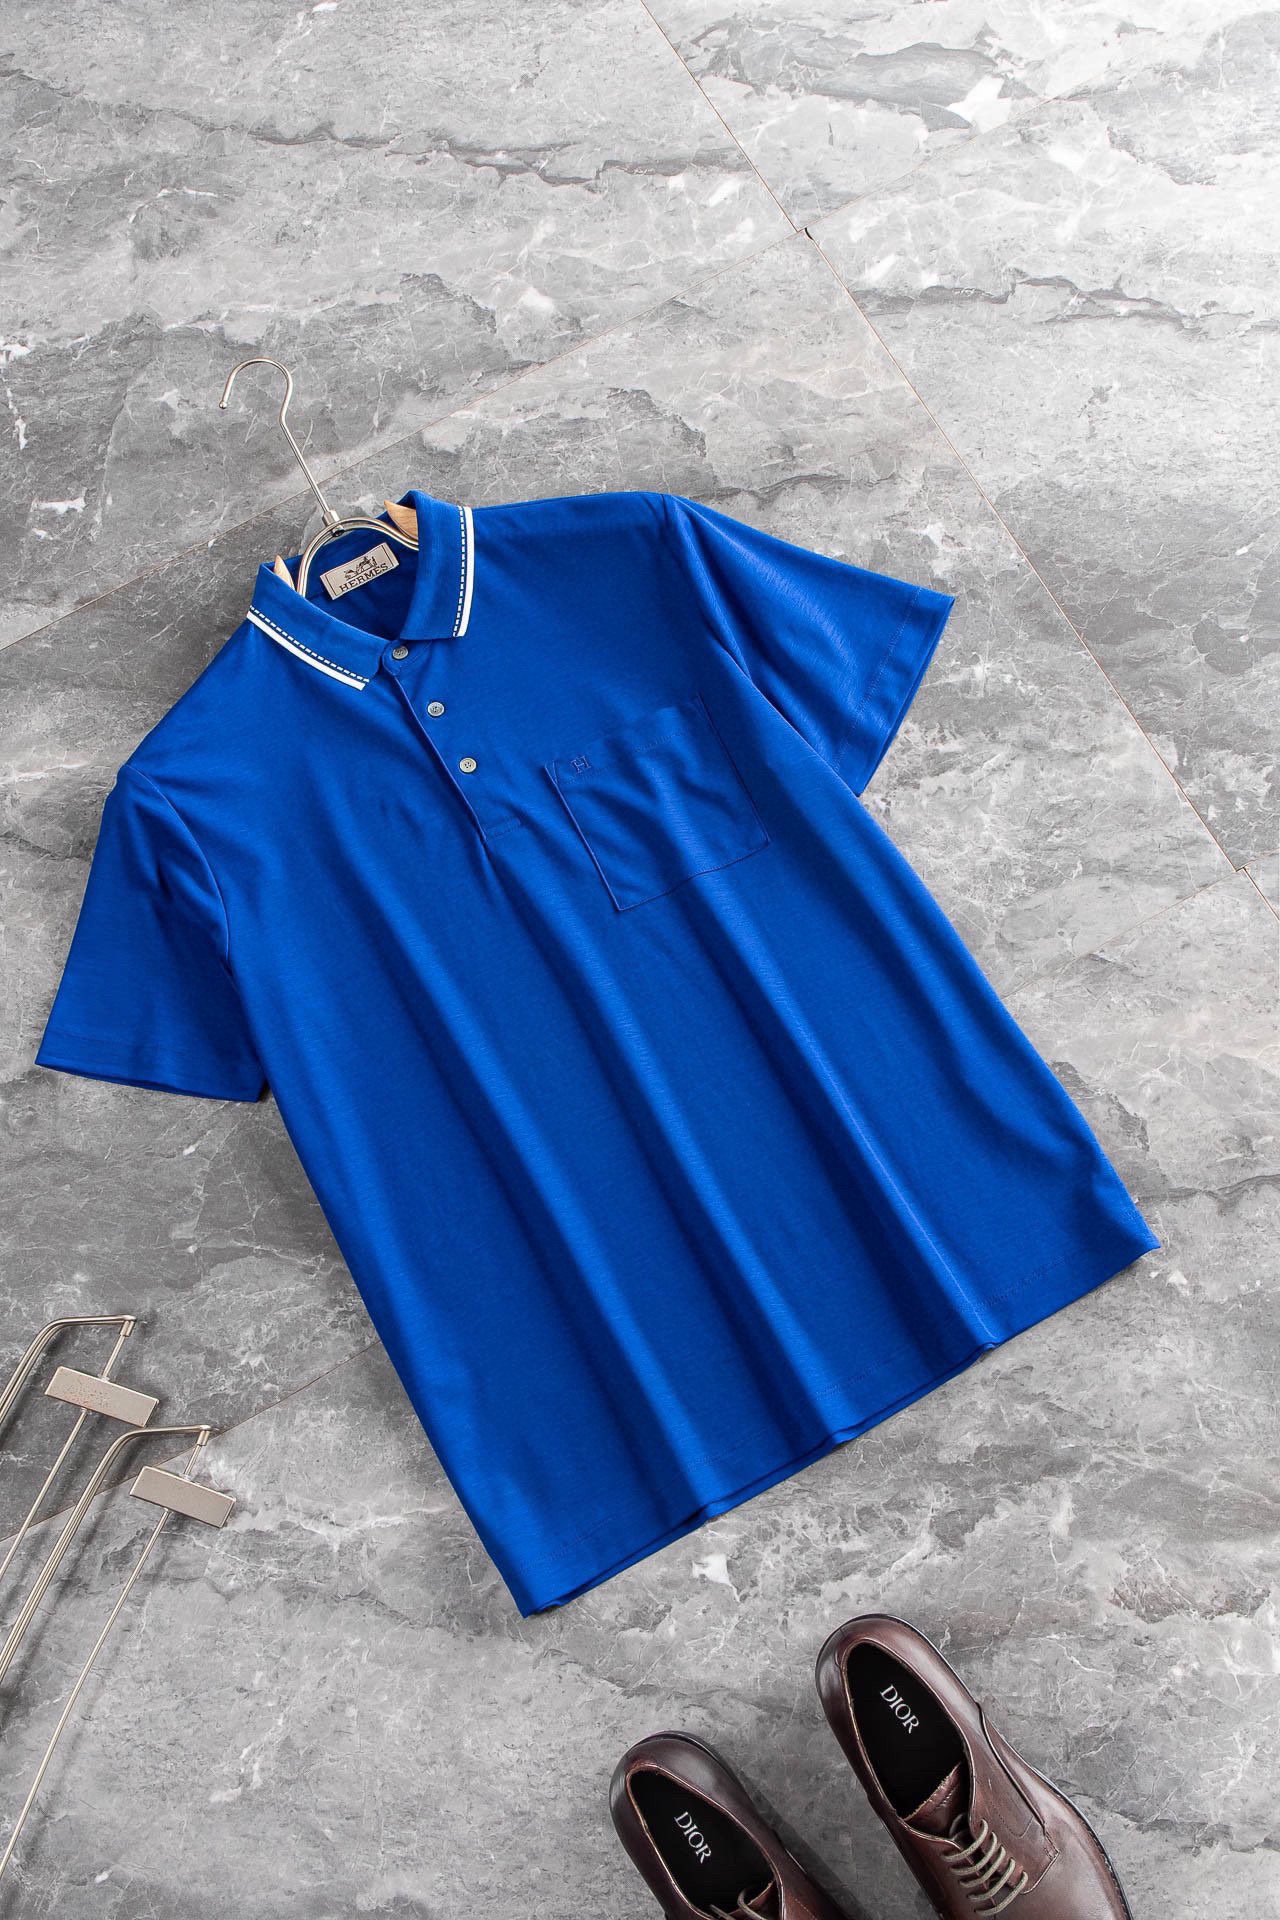 Hermes Clothing Polo T-Shirt Top brands like
 Men Cotton Spring/Summer Collection Fashion Short Sleeve